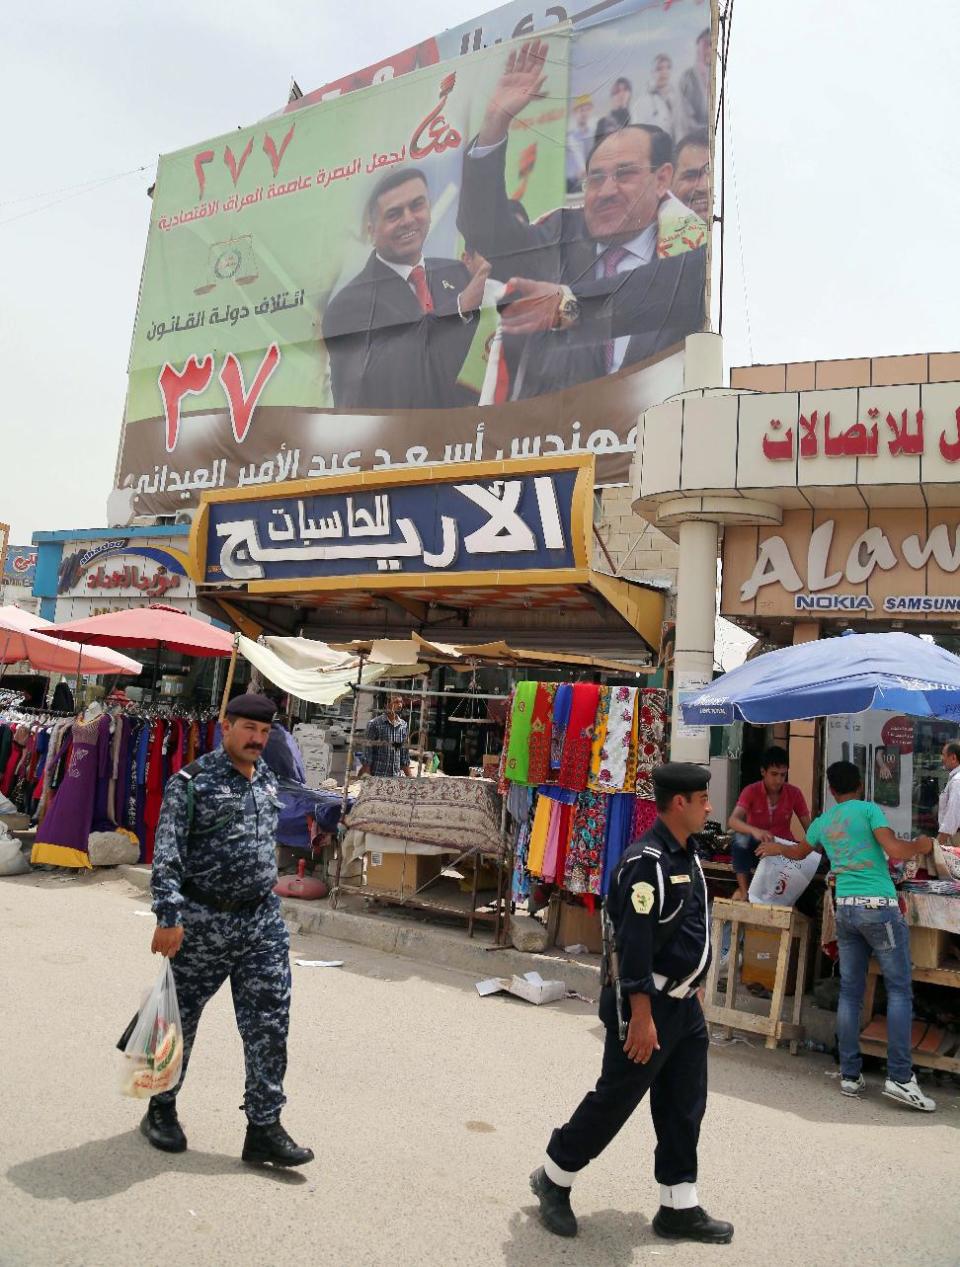 FILE - In this file photo taken on April 27, 2014 security forces pass under a campaign poster of Iraqi Prime Minister Nouri al-Maliki in Basra, Iraq's second-largest city, 340 miles (550 kilometers) southeast of Baghdad, Iraq. If Iraqi Prime Minister Nouri al-Maliki wins a third four-year term in parliamentary elections Wednesday, he is likely to rely on a narrow sectarian Shiite base, only fueling divisions as Iraq slides deeper into bloody Shiite-Sunni hatreds. (AP Photo/ Nabil al-Jurani, File)